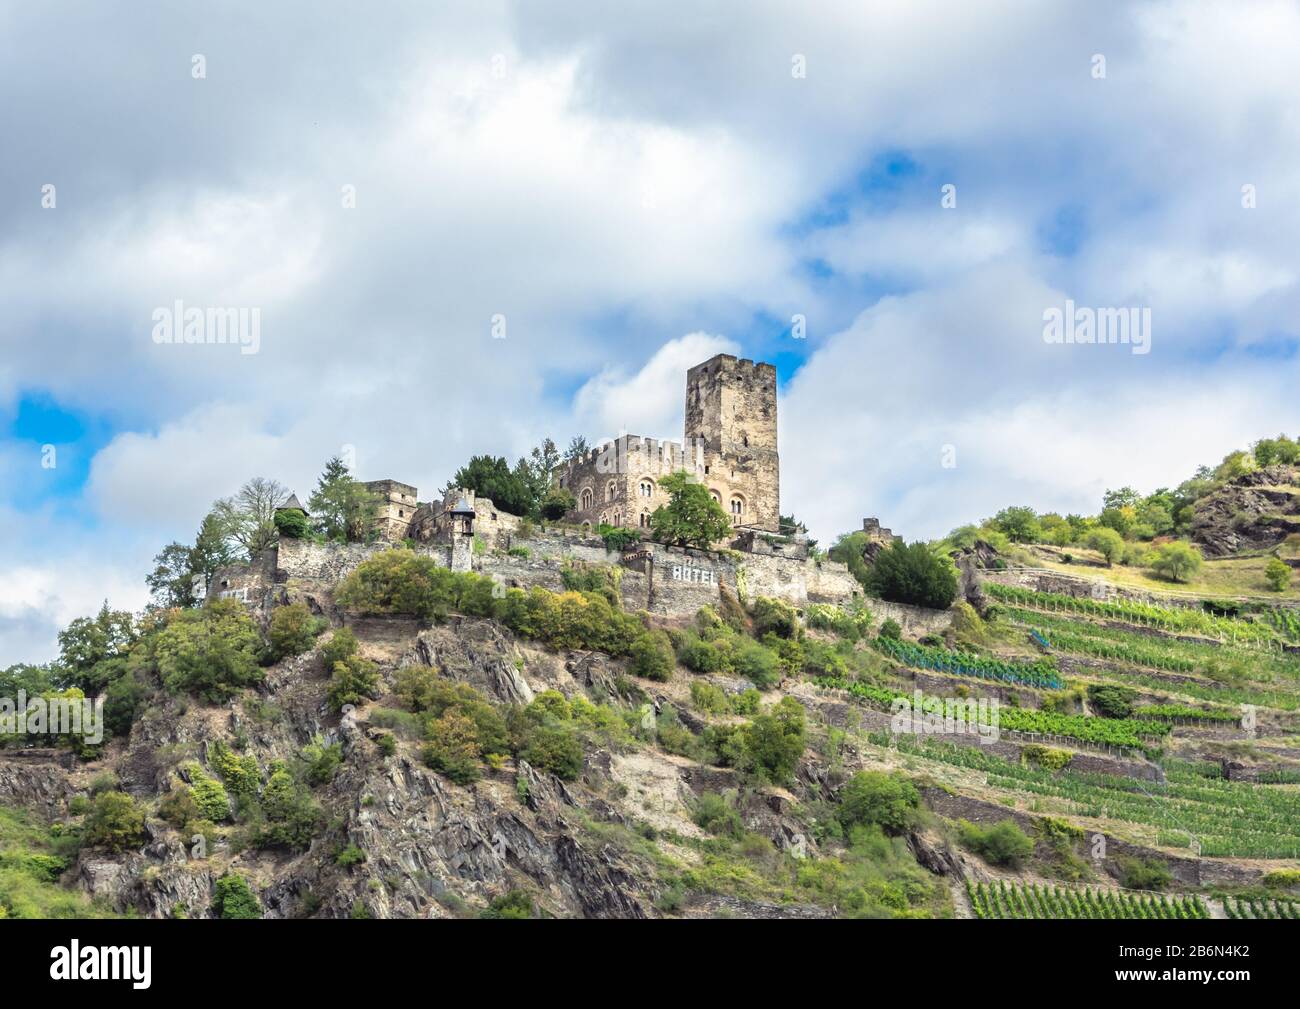 Burg Gutenfels, Gutenfels Castle, also known as Caub Castle, is a castle 110m above the town of Kaub in Rhineland. Stock Photo